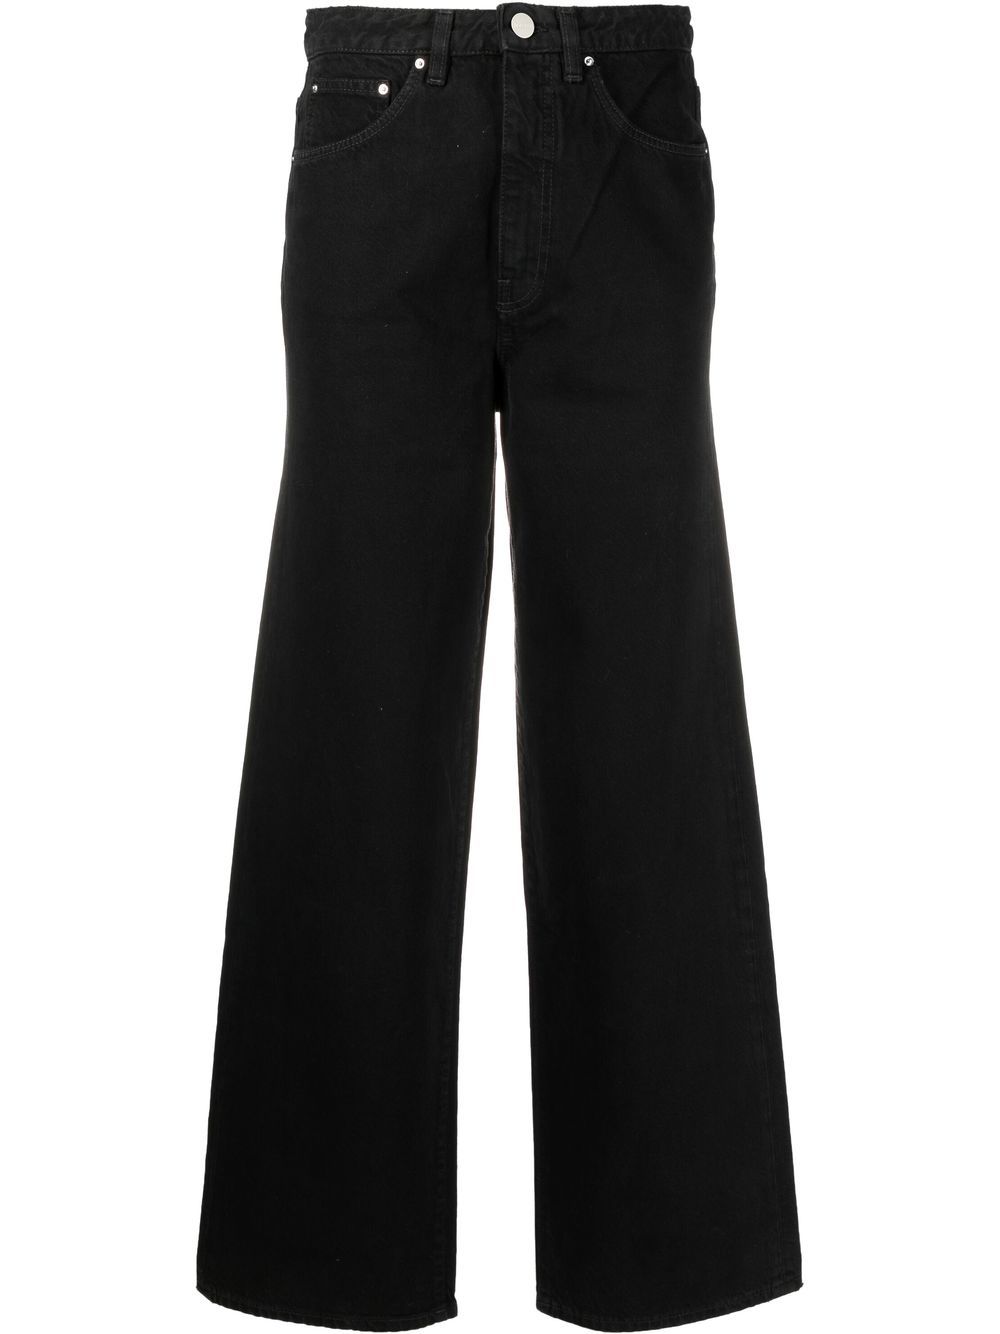 TOTEME high-waisted flared jeans - Black von TOTEME